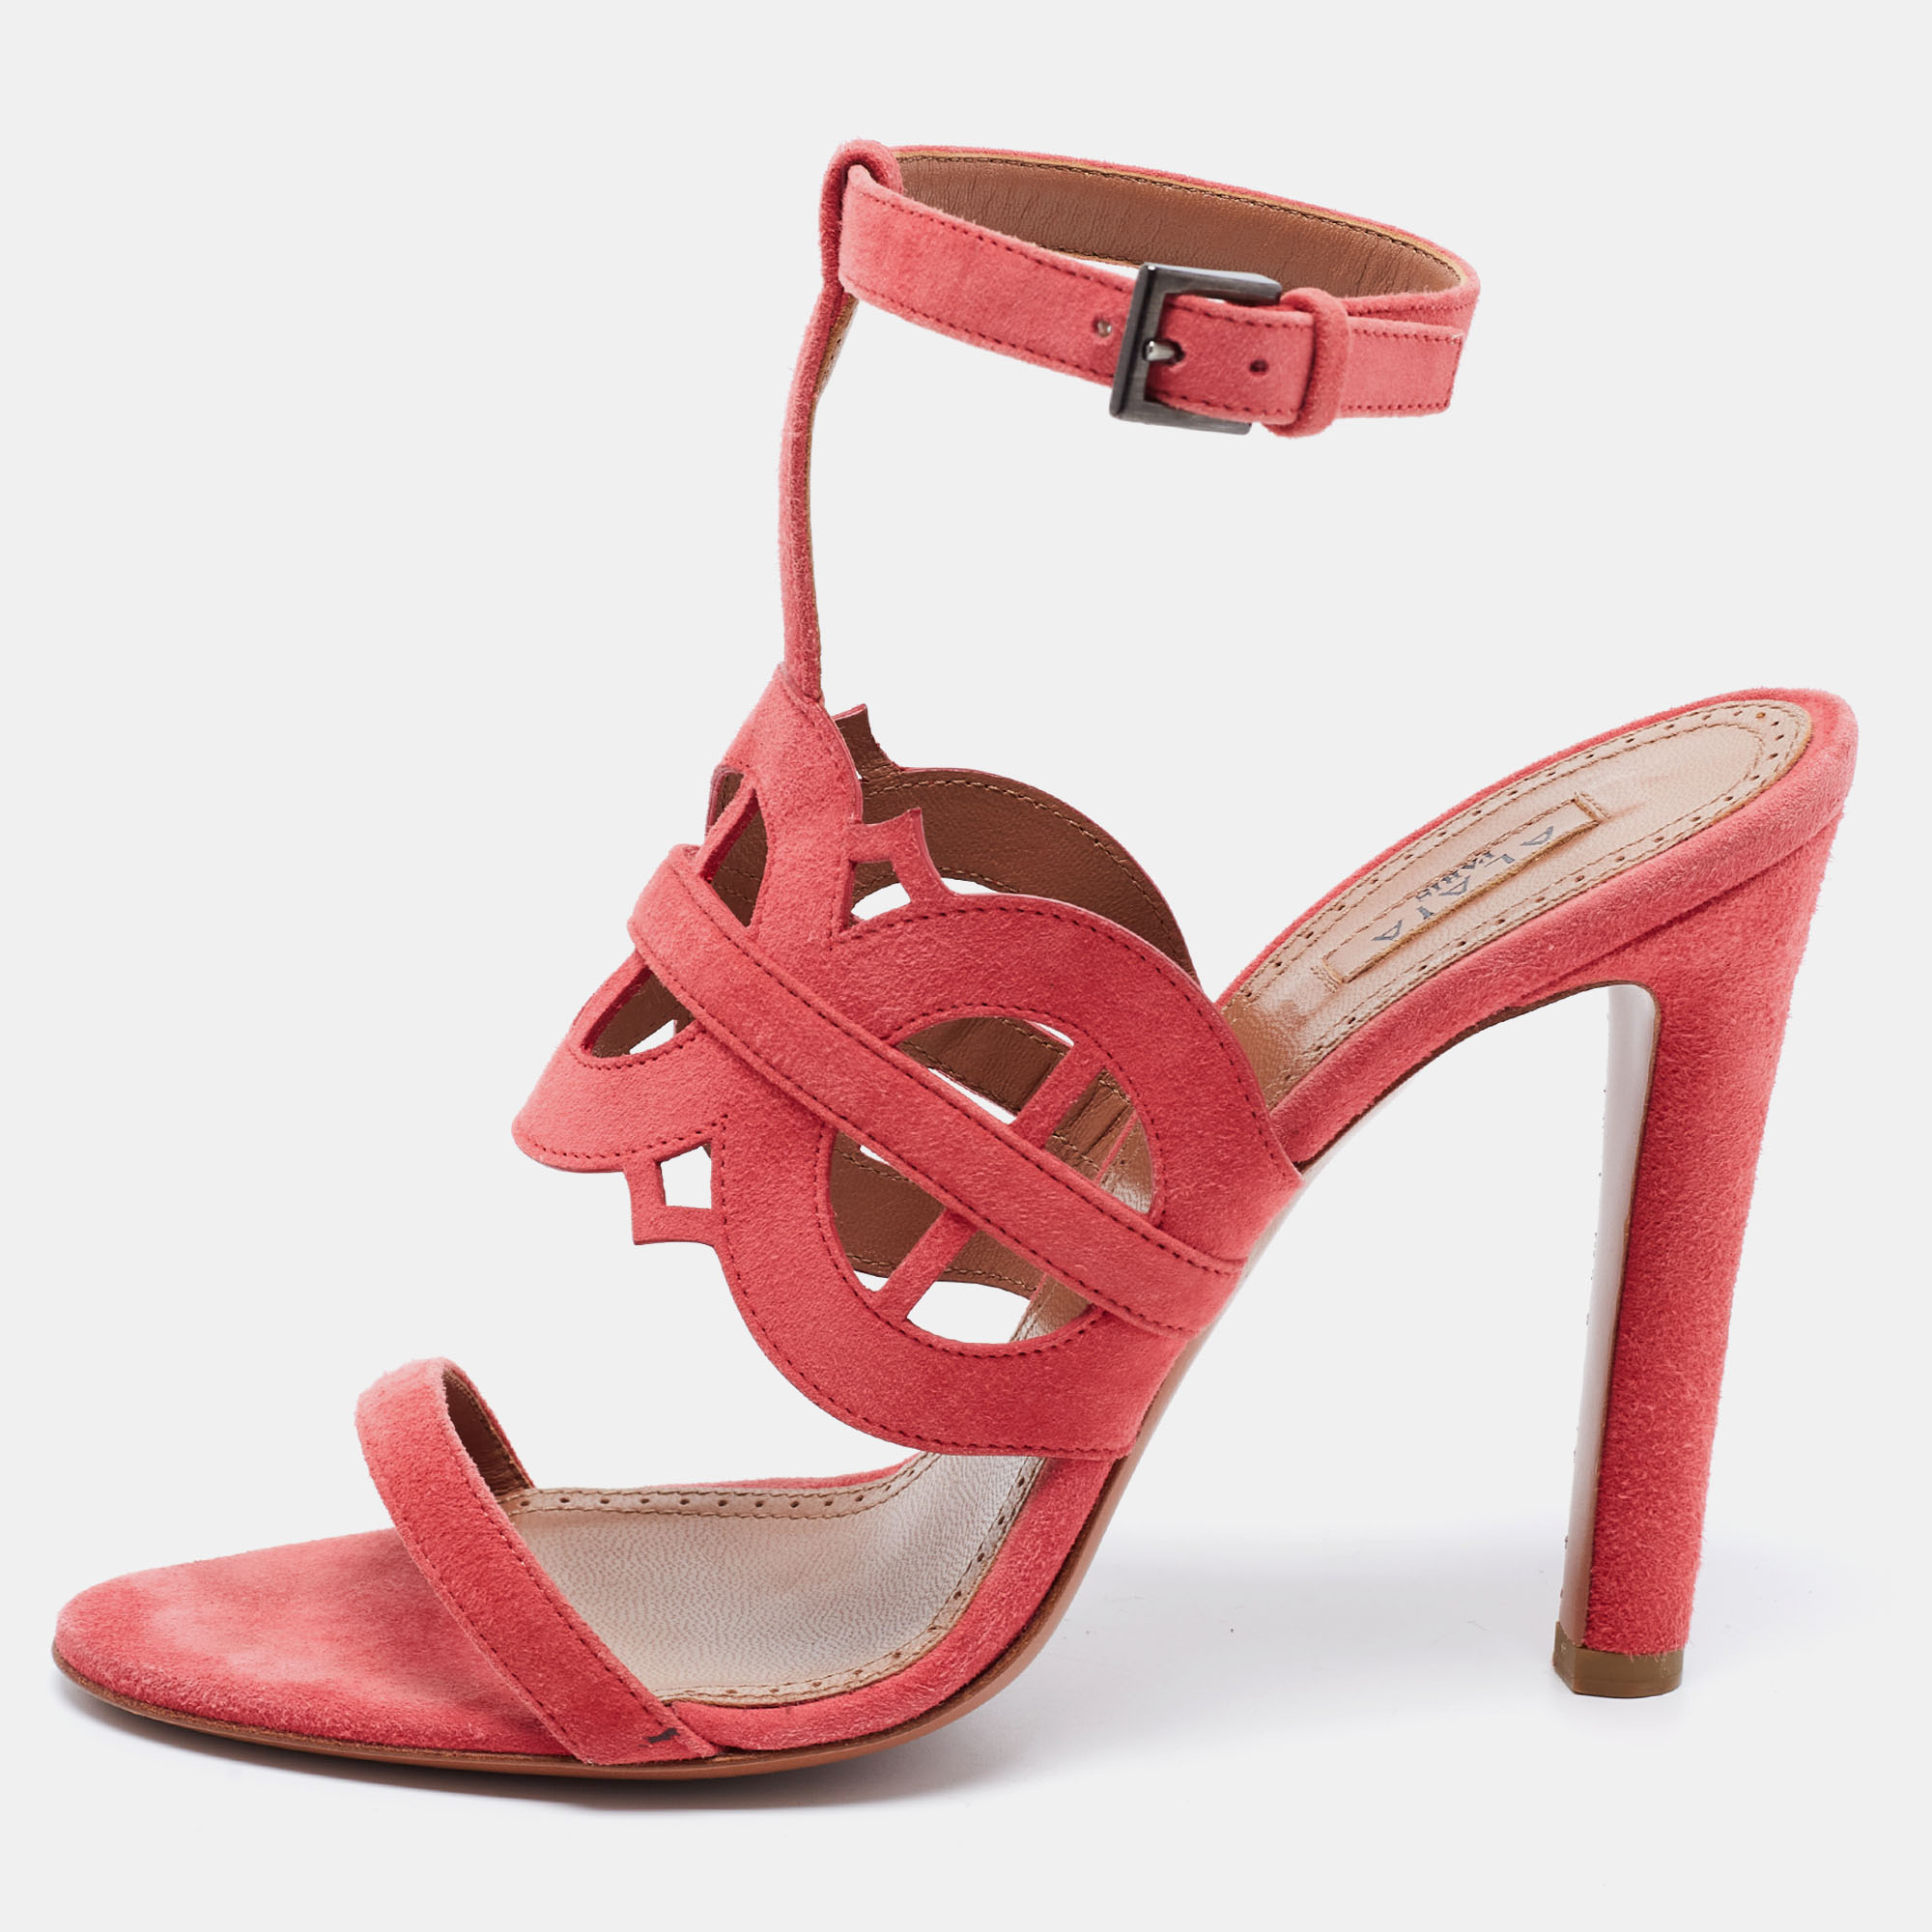 Alaia Pink Suede Cut Out Open Toe Sandals Size 38.5